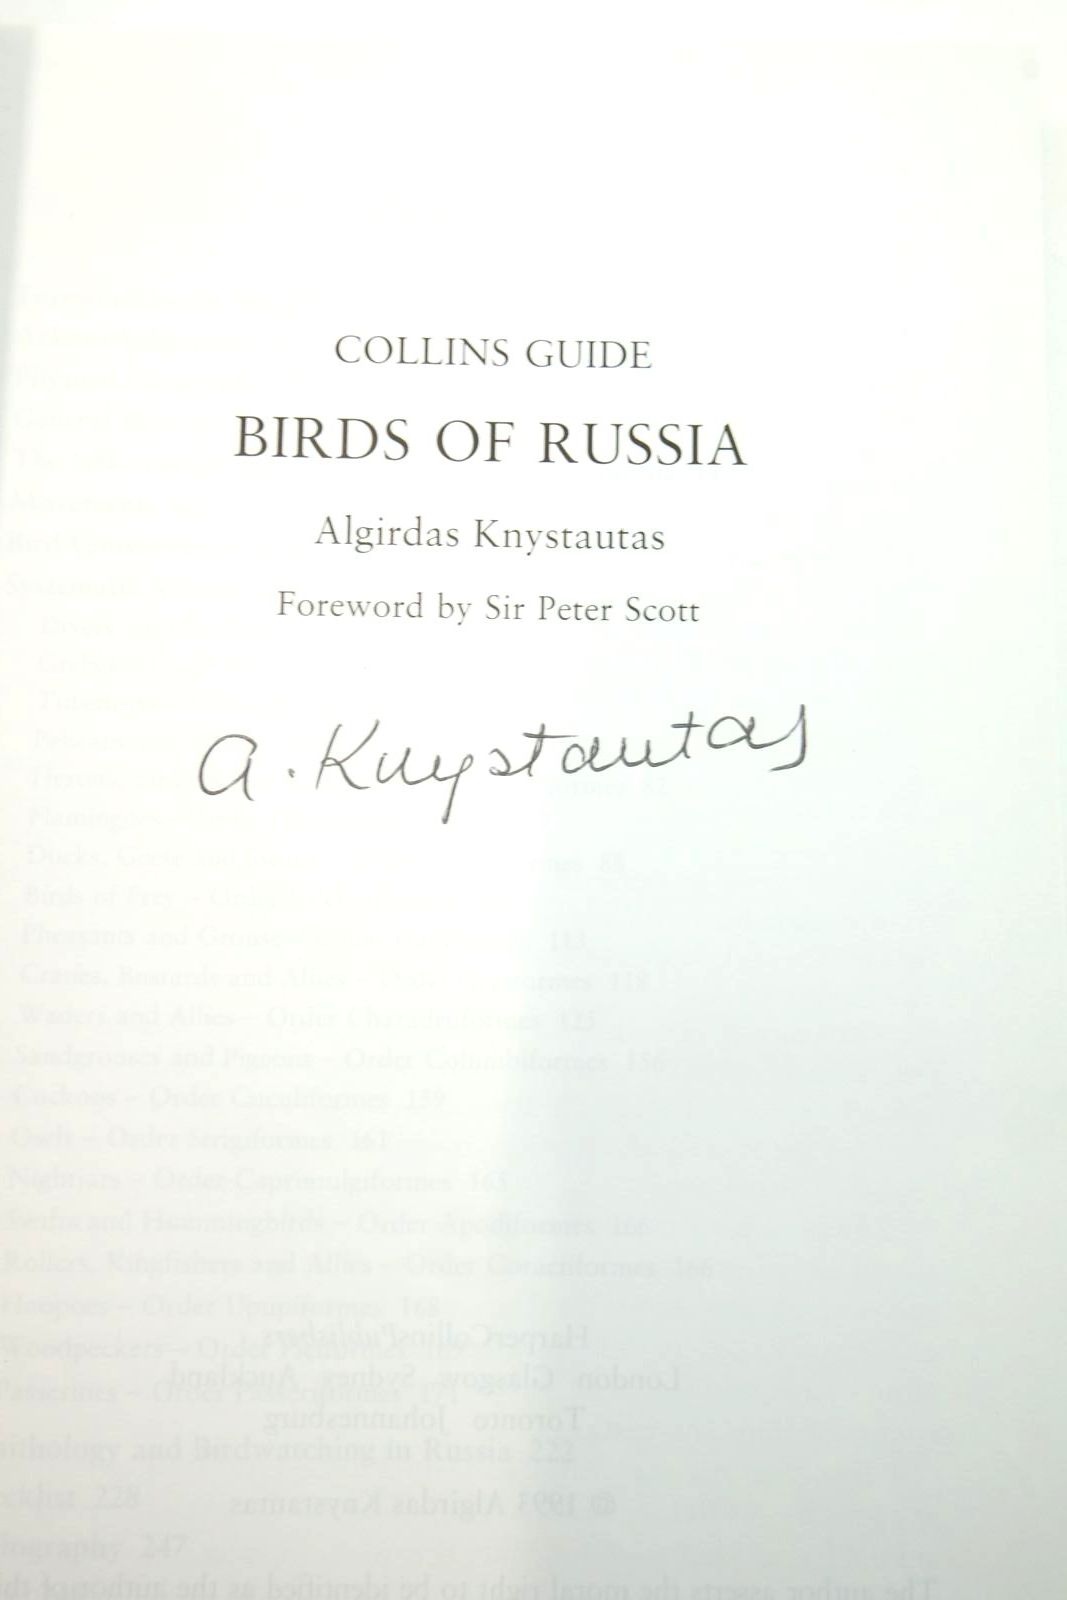 Photo of COLLINS GUIDE: BIRDS OF RUSSIA written by Knystautas, Algirdas published by Harper Collins (STOCK CODE: 2137372)  for sale by Stella & Rose's Books